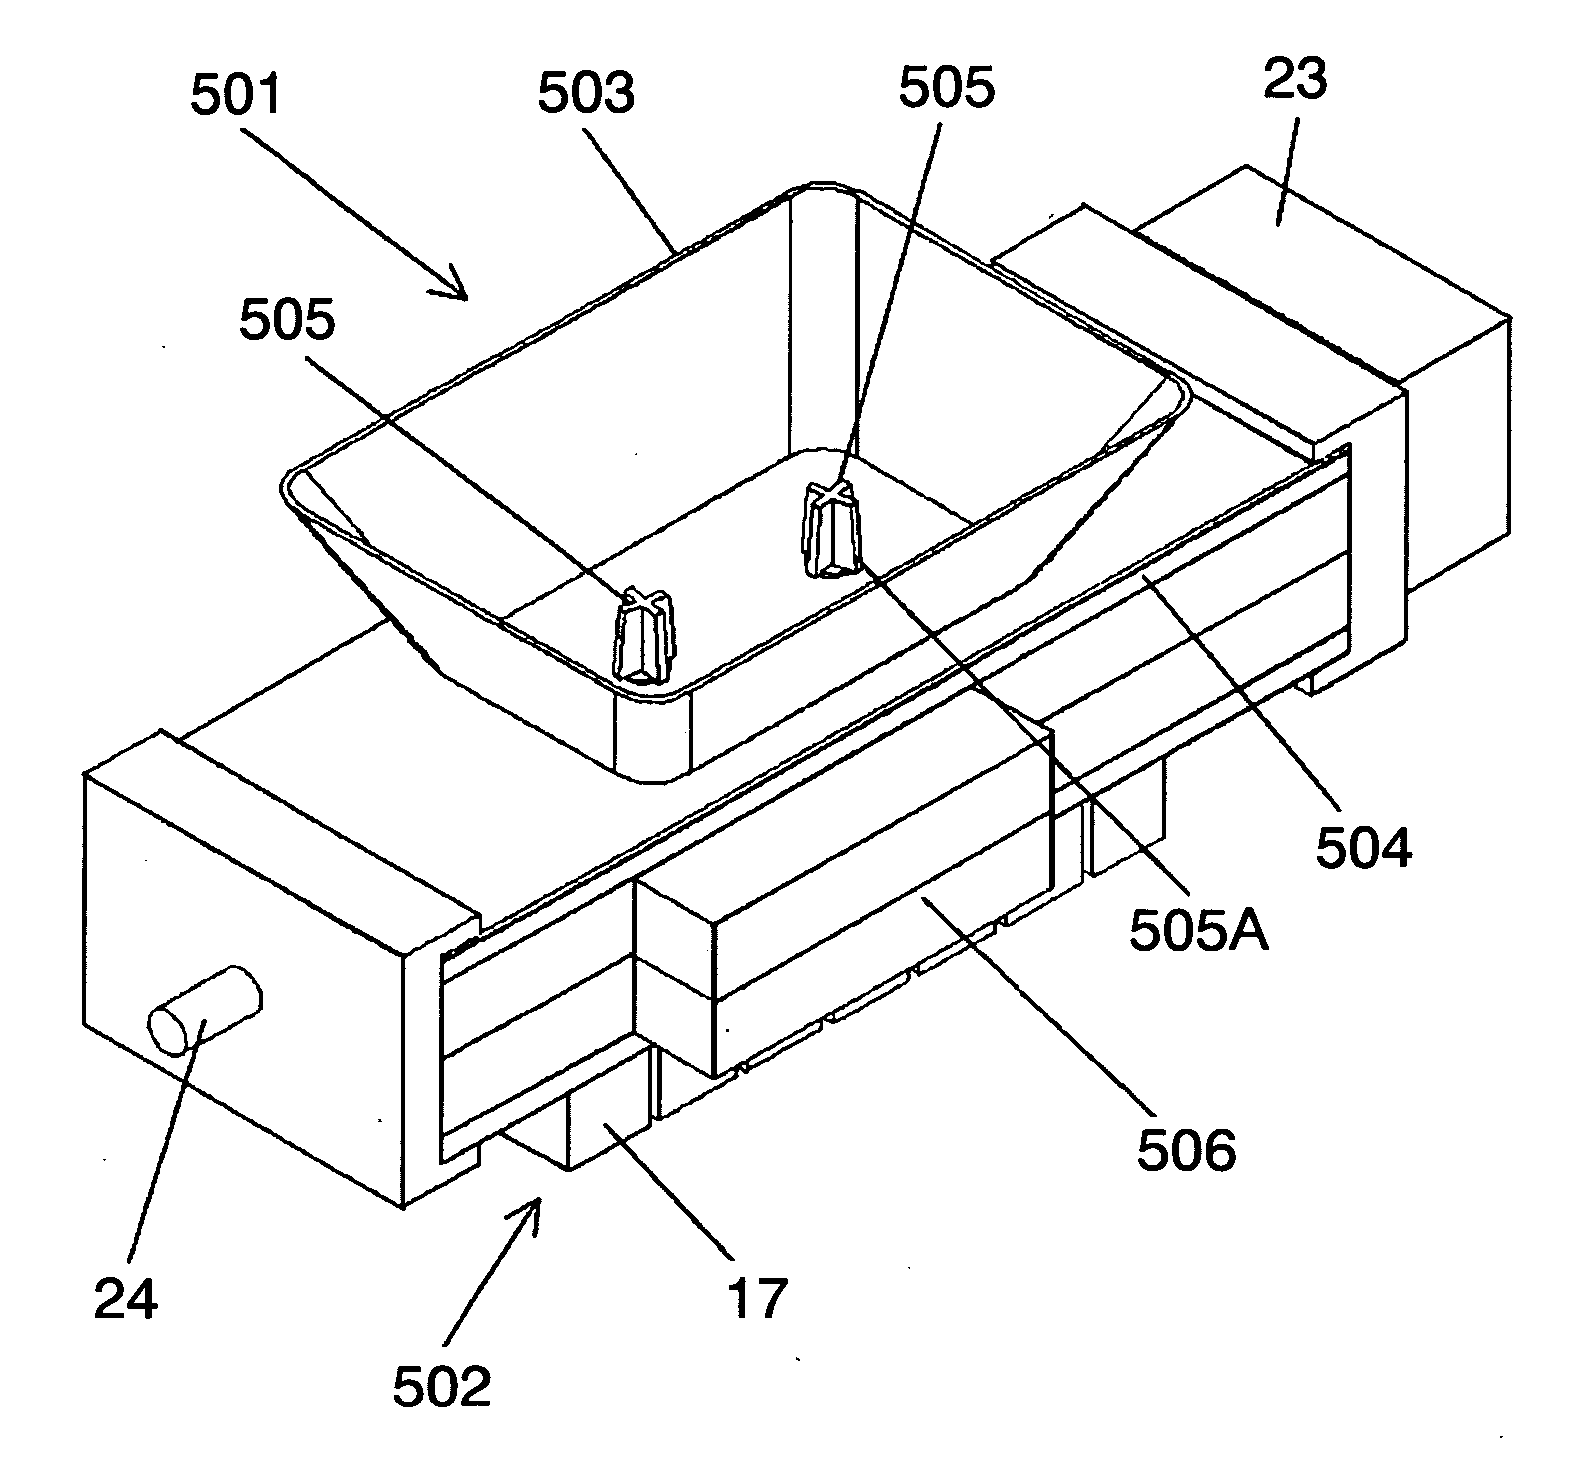 Ice-making device